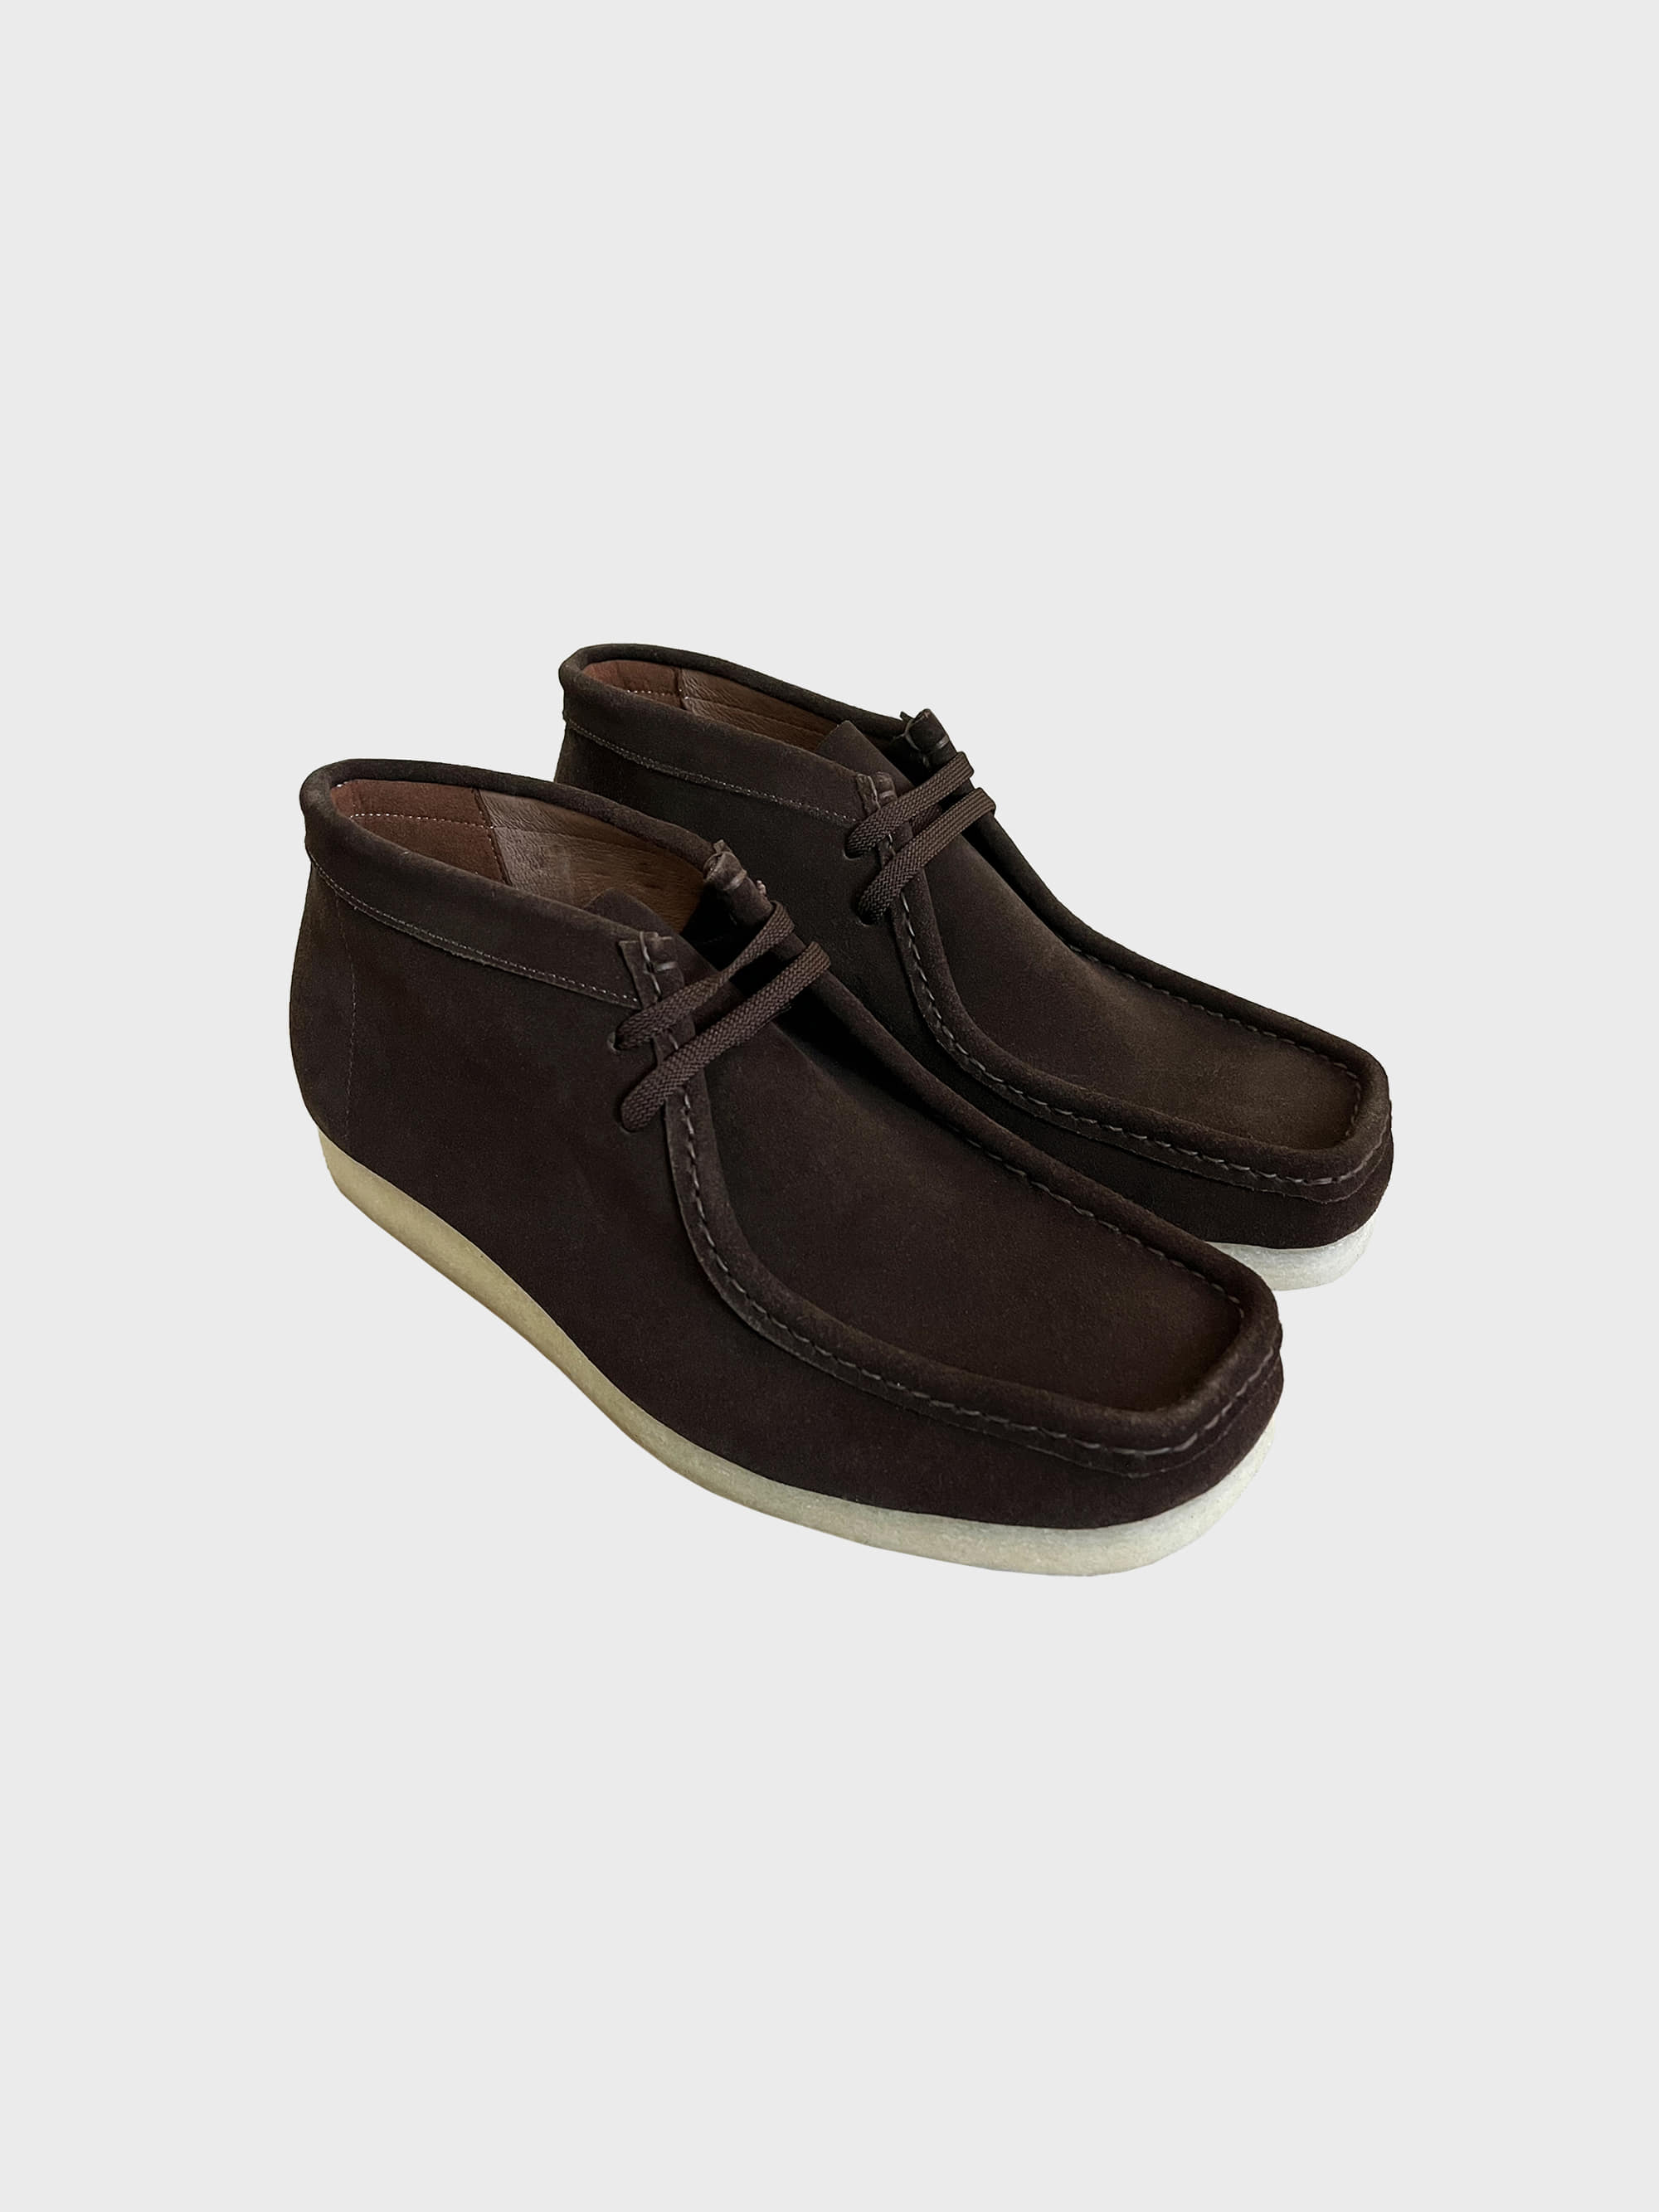 Taily suede desert boots (2color)